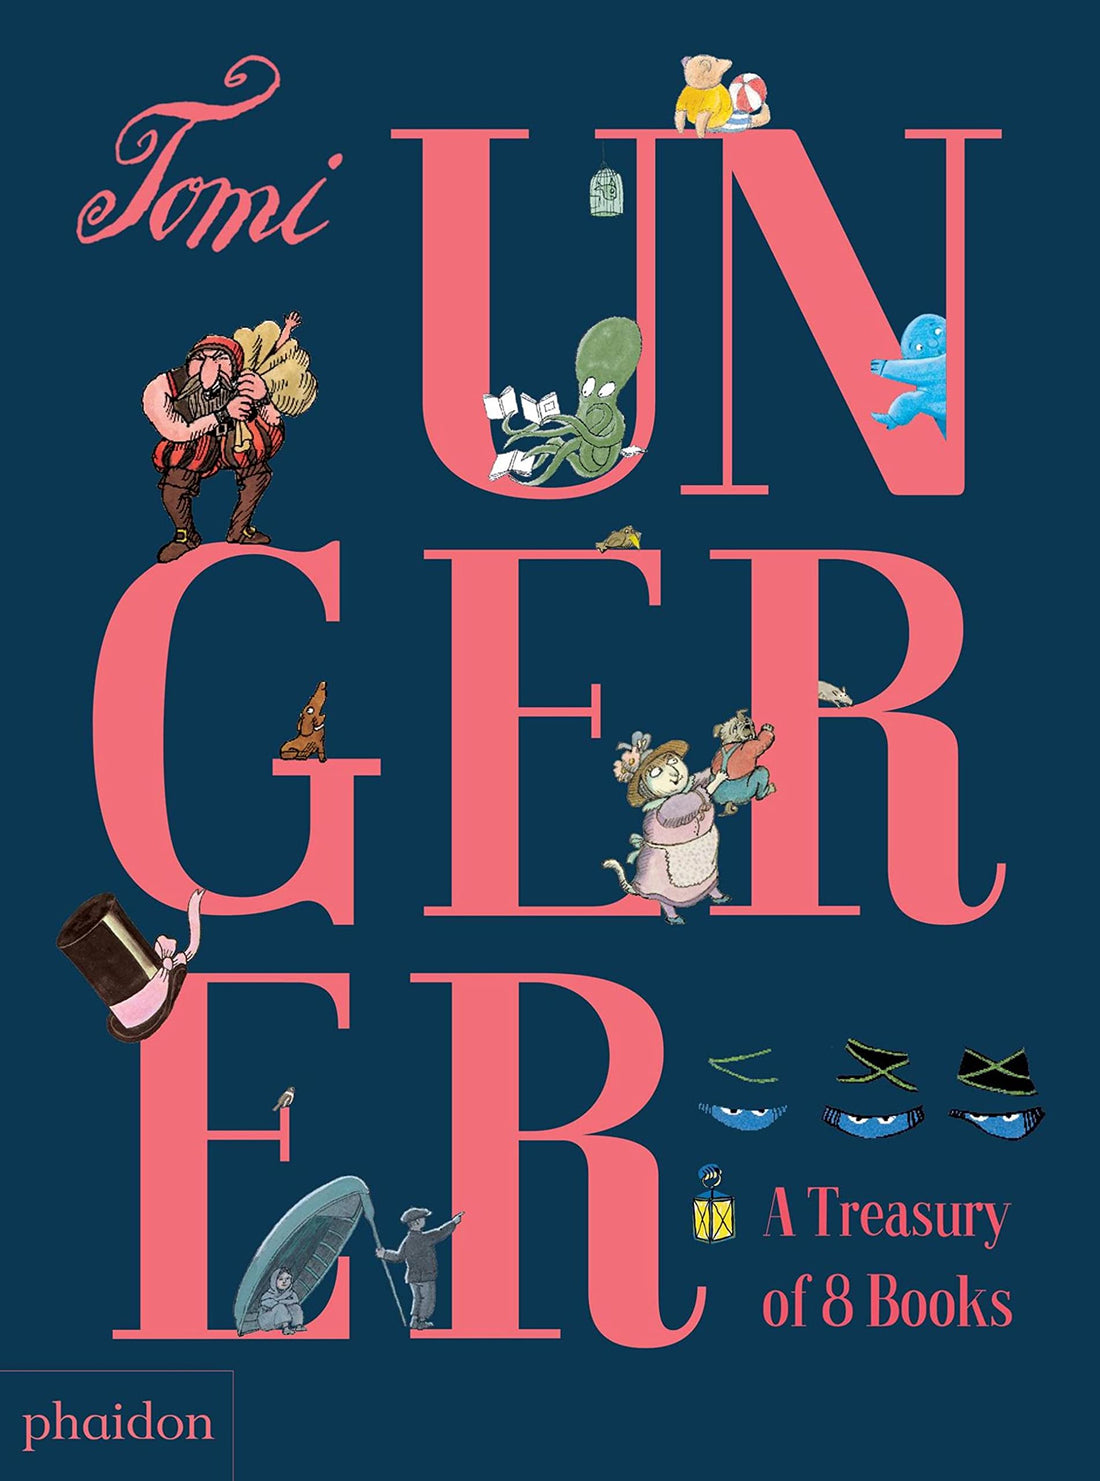 Tomi Ungerer: A Treasury of Eight Books - Parkette.